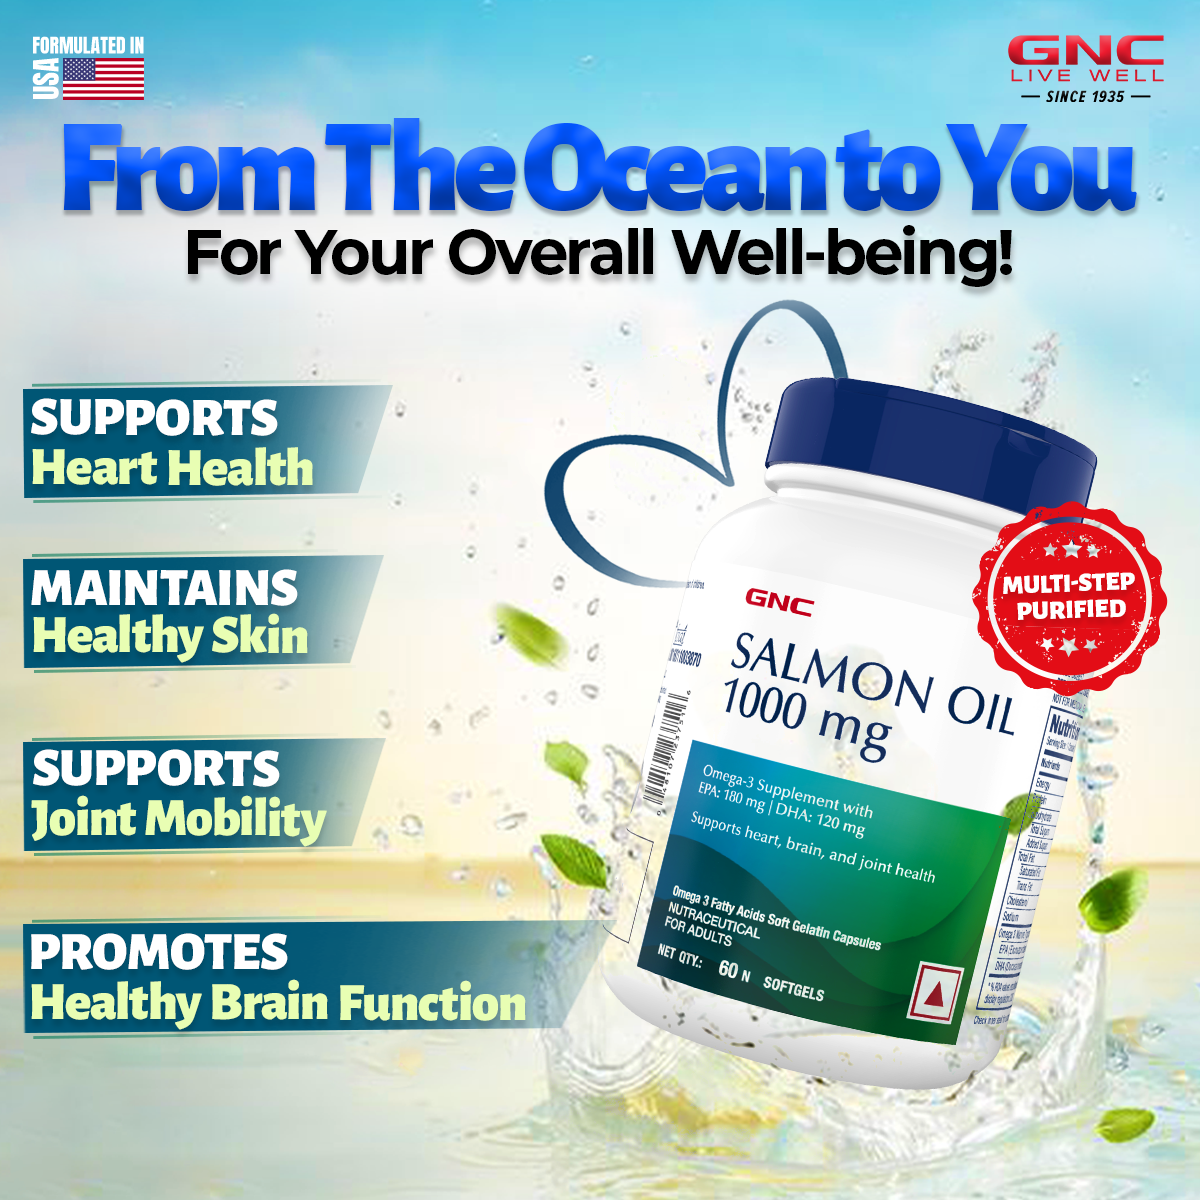 GNC Salmon Oil 1000mg - Clearance Sale - Supports Joint Health, Vision & Overall Well-Being